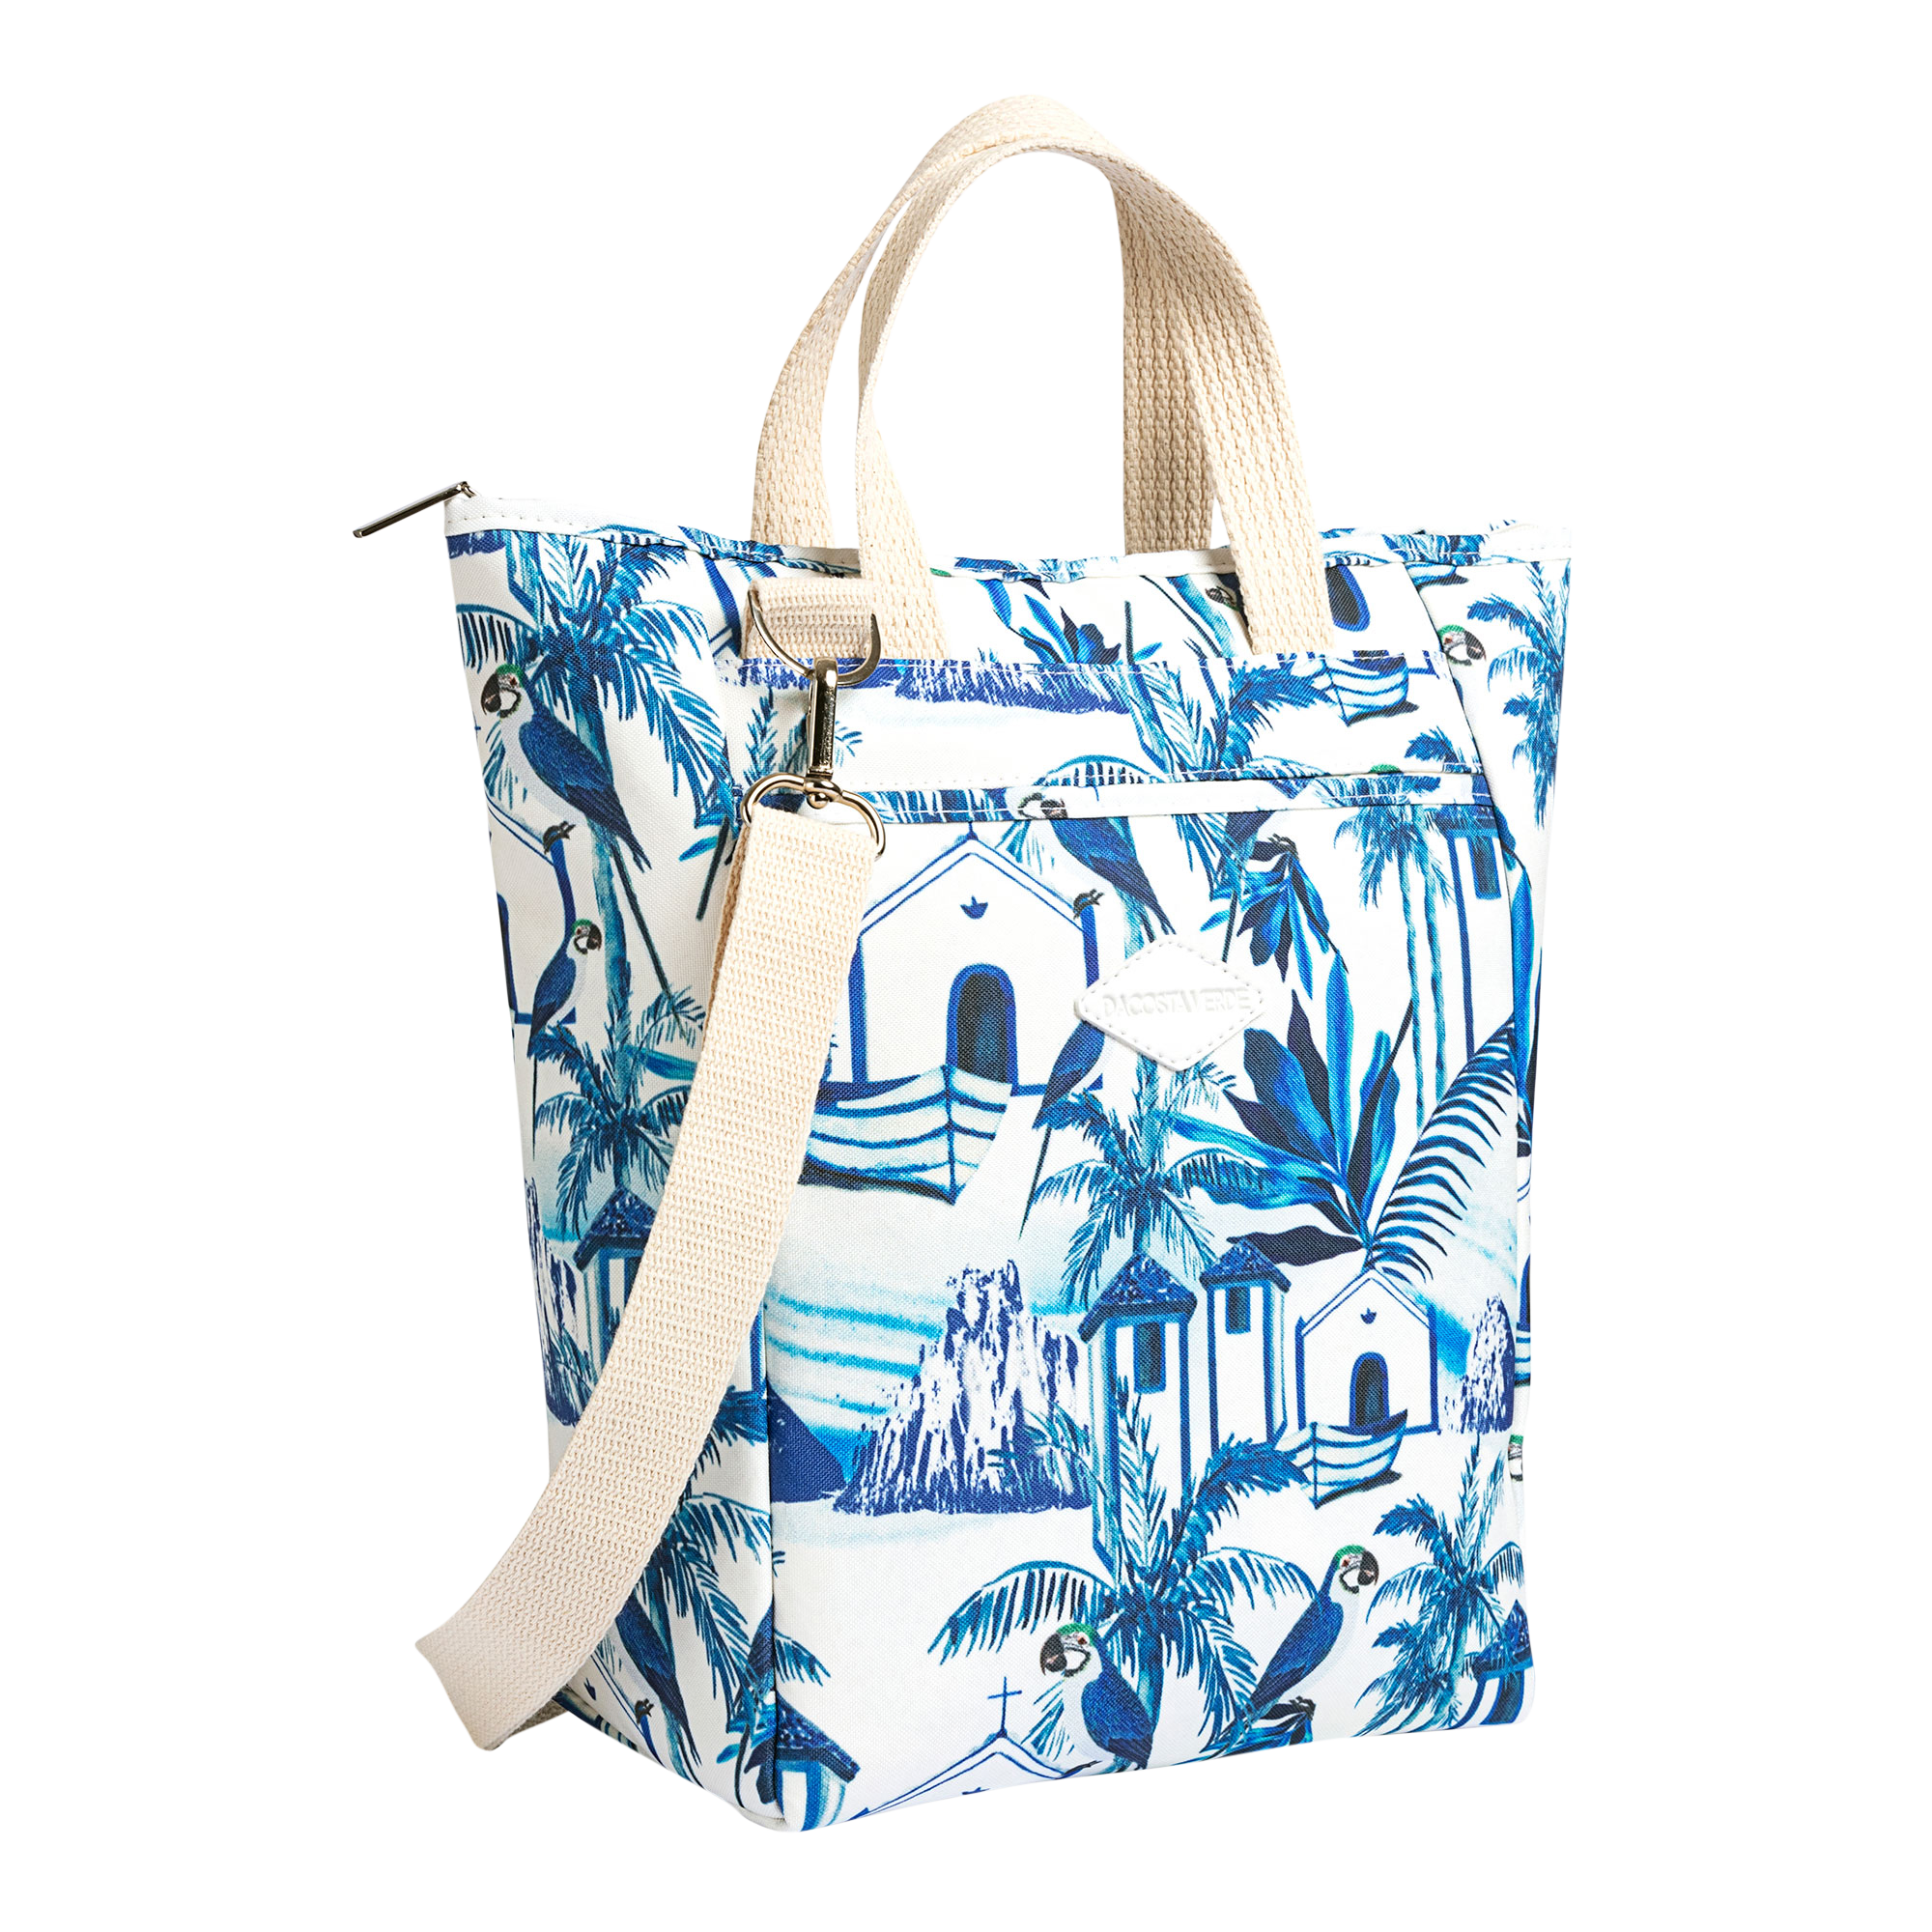 blue tote bags